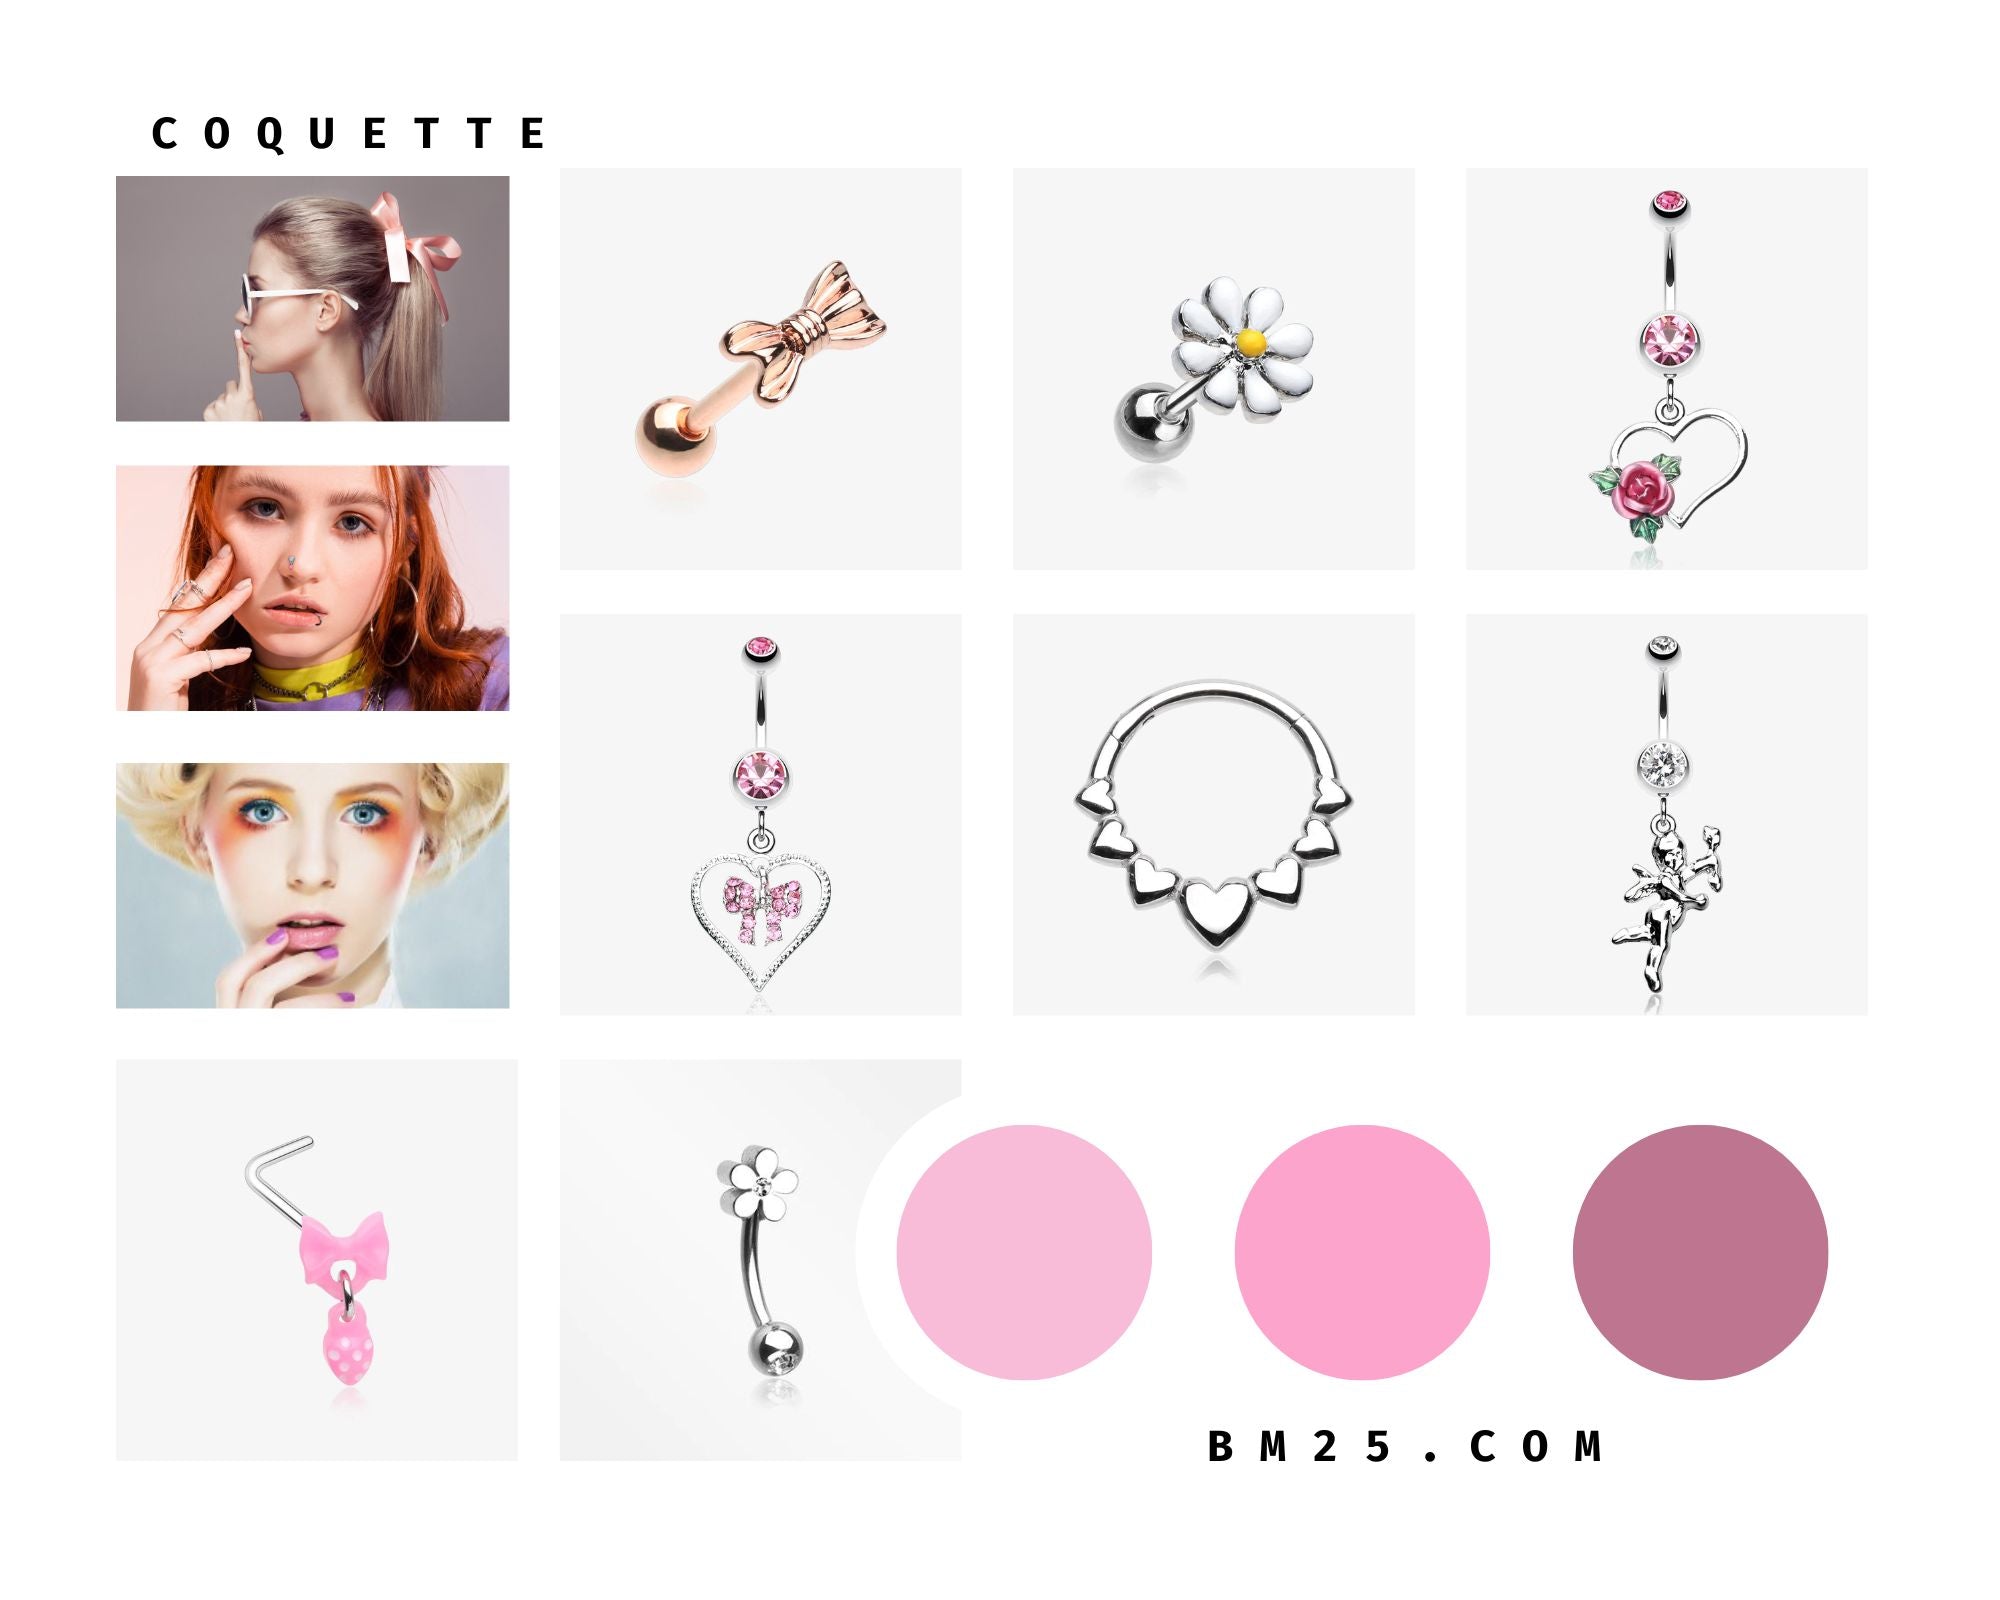 Coquette Styled Body Jewlery Style Guide from Bm25.com